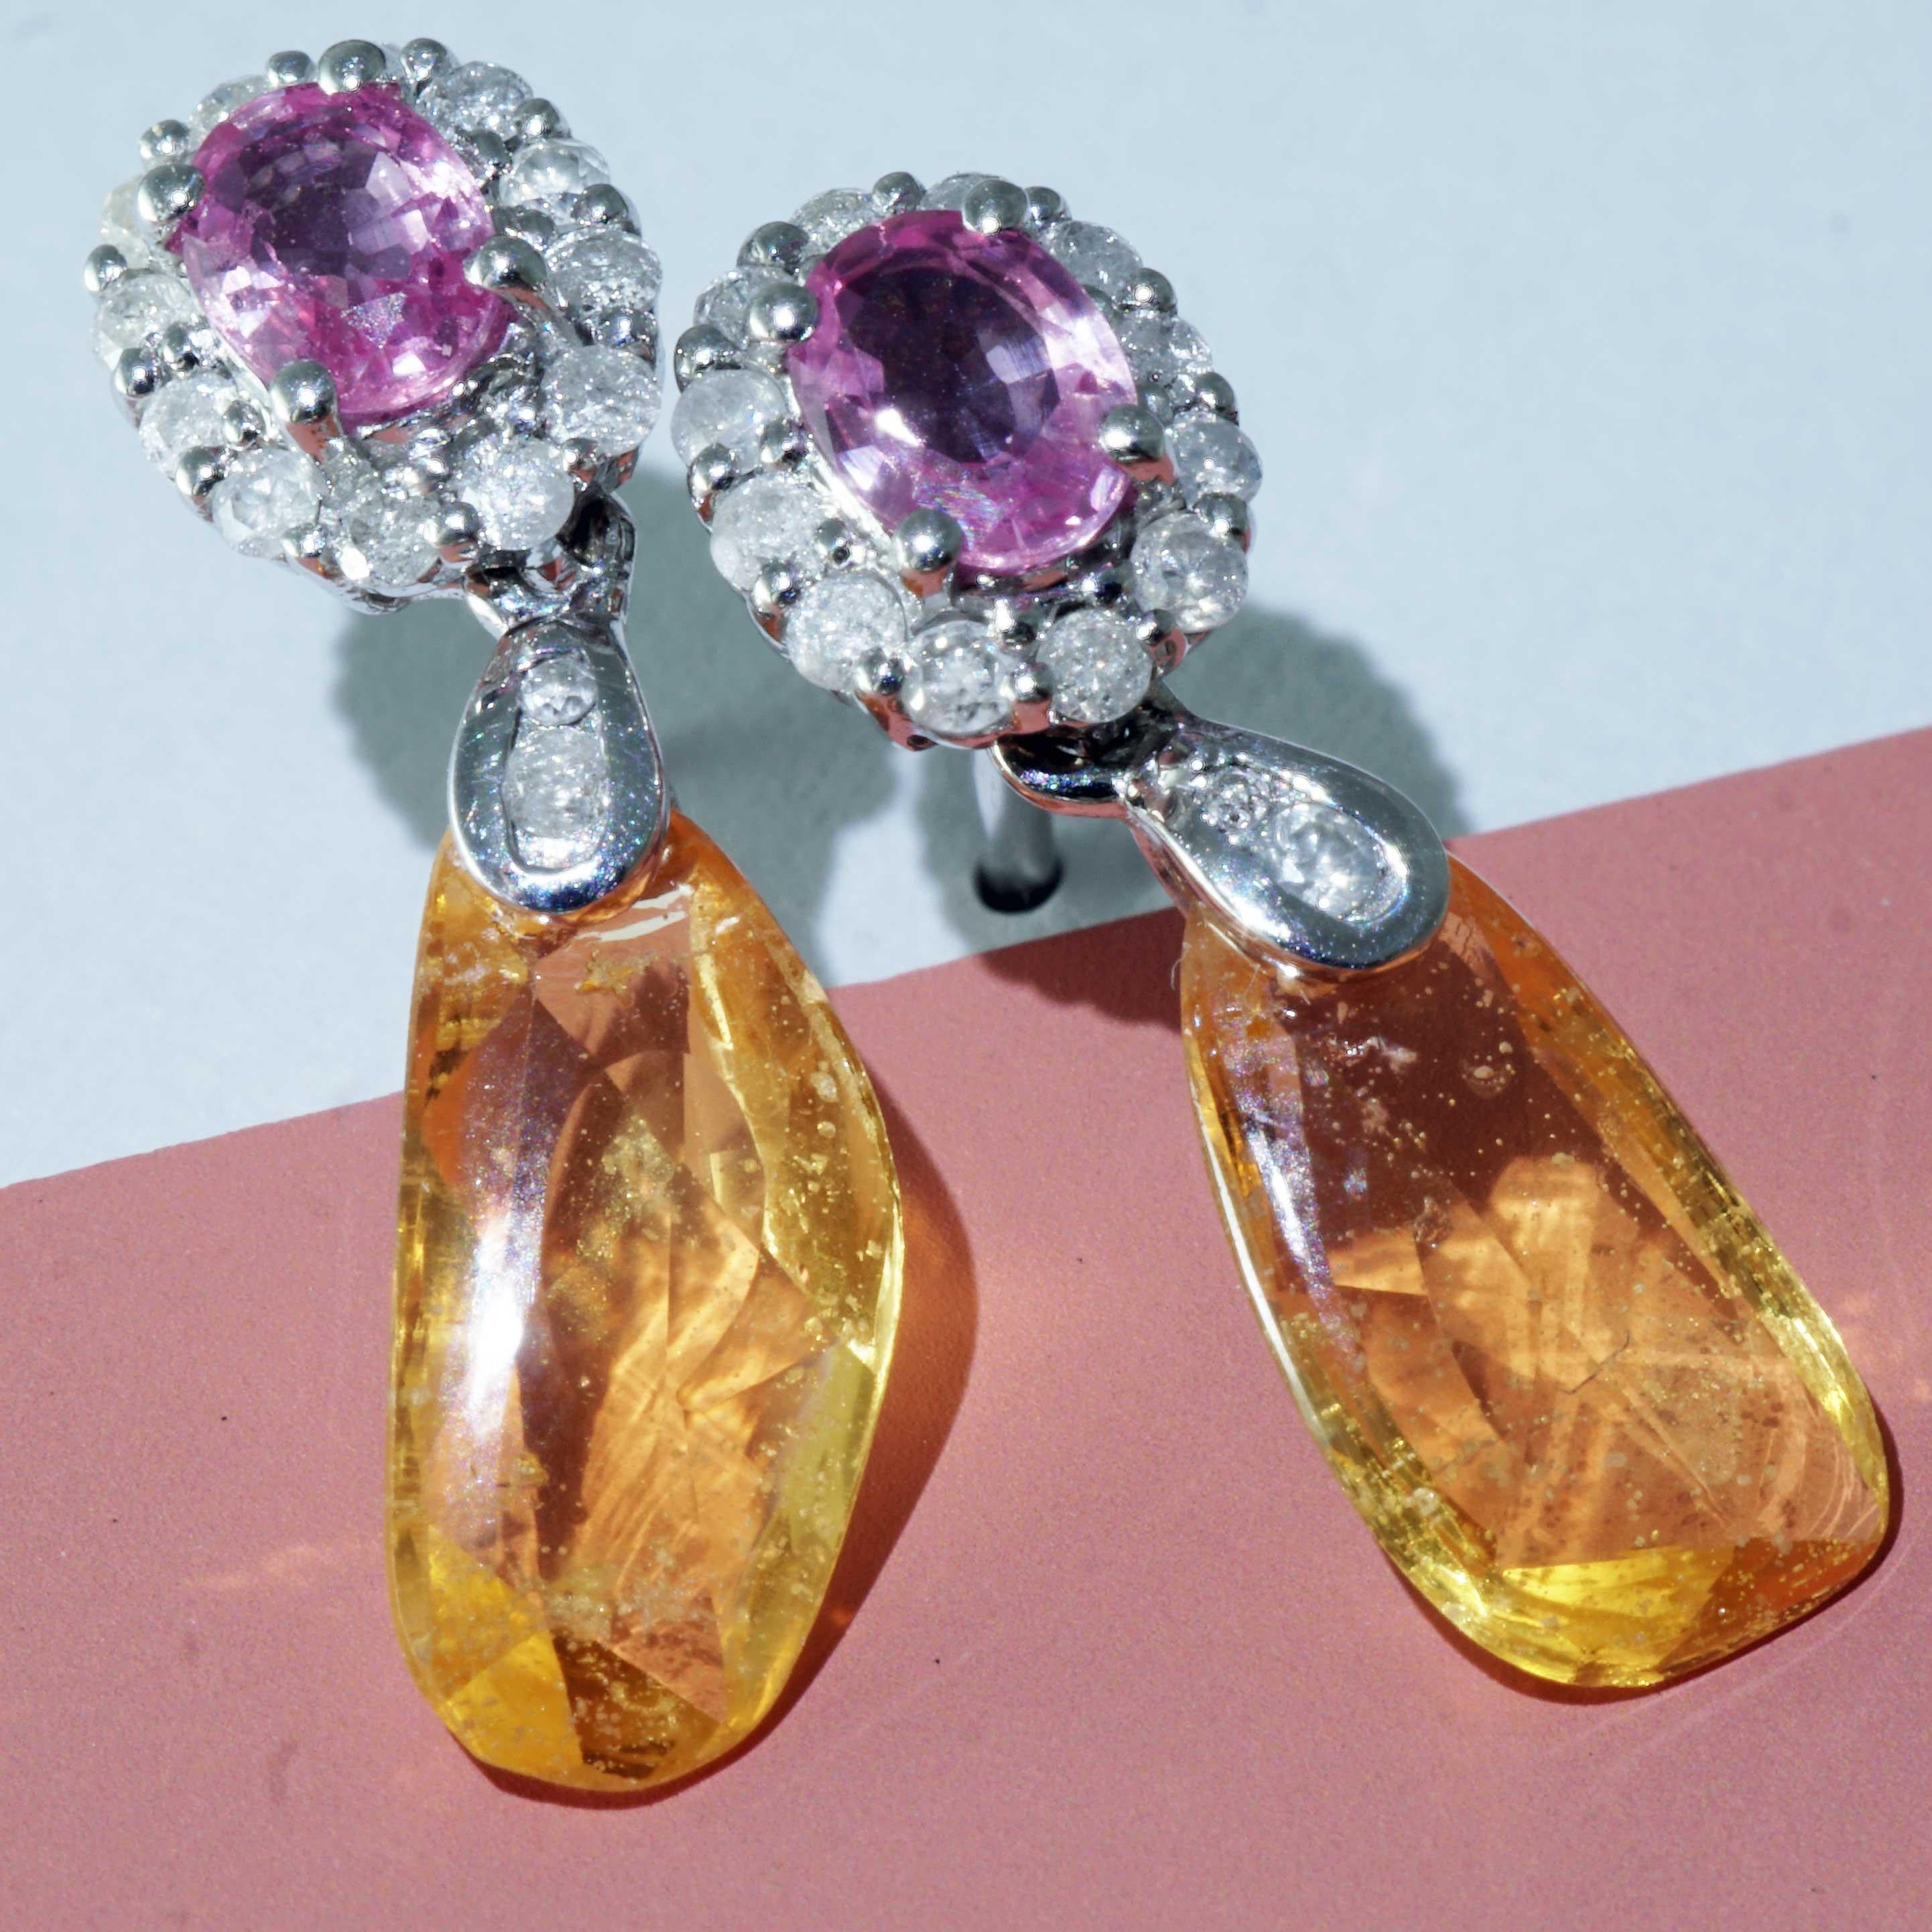 Sugarloaf pink and orange Saphire Brilliant Earrings for a glorious Appearance 10